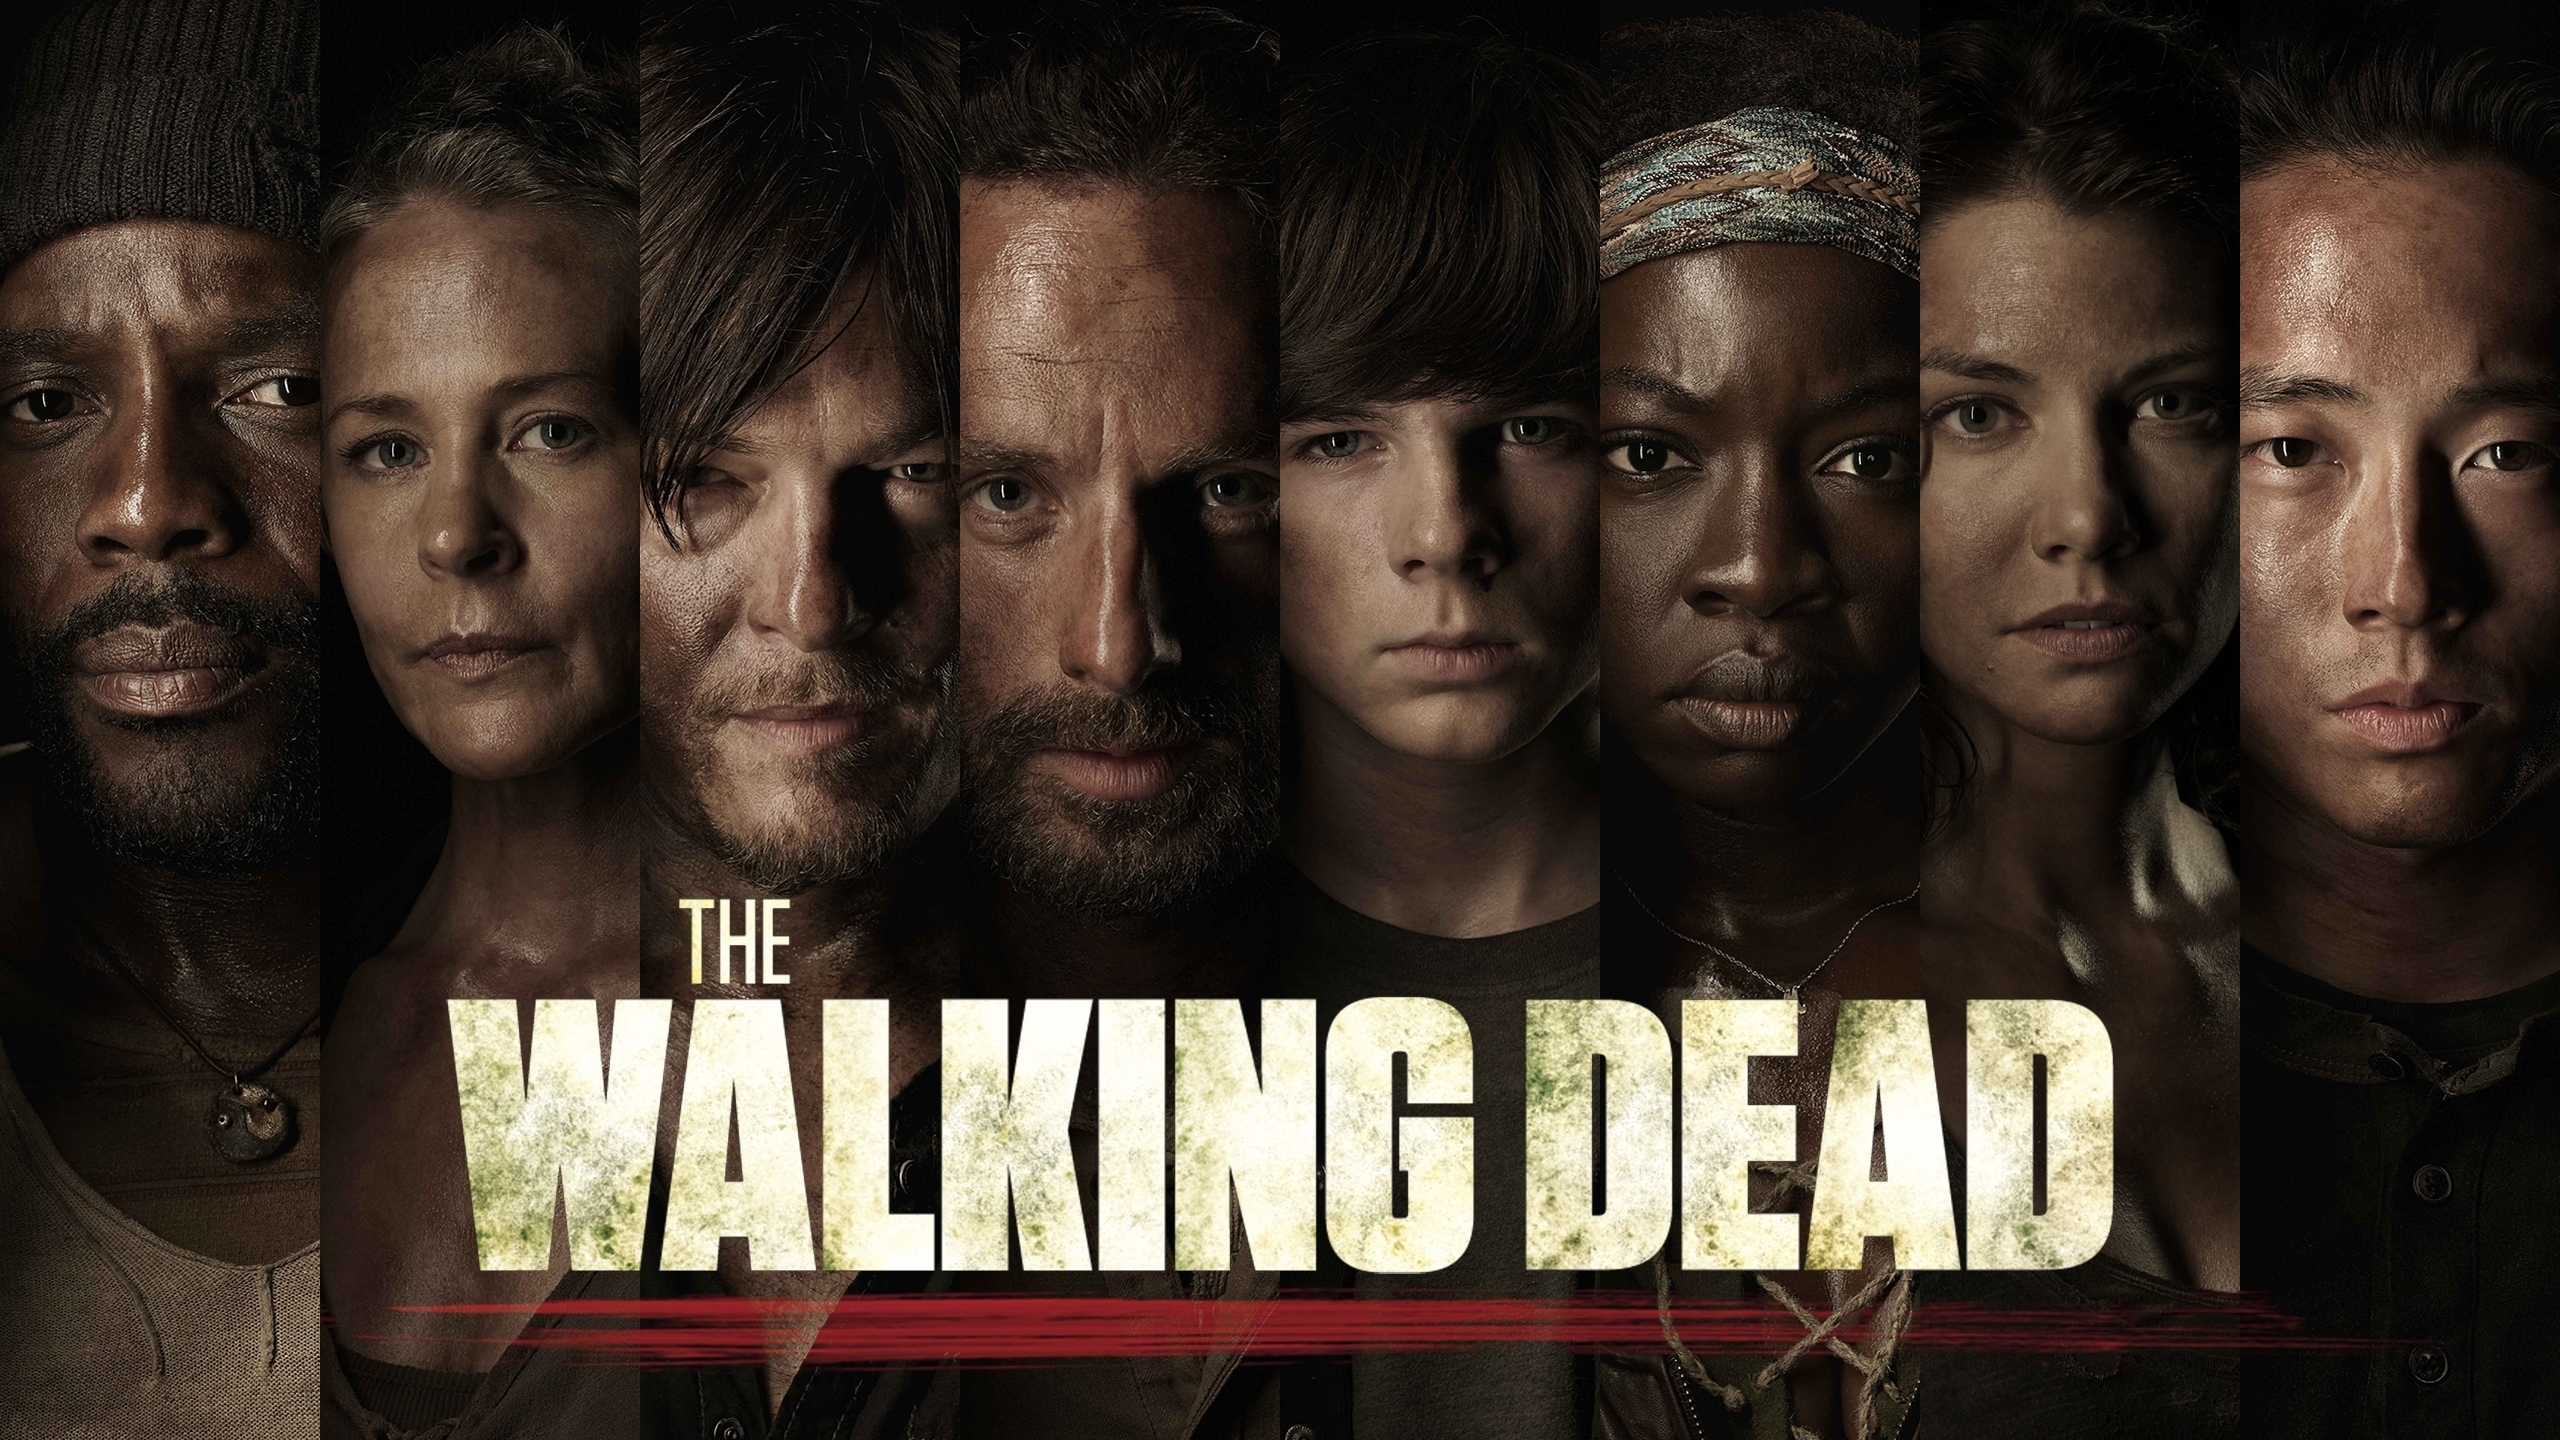 The Walking Dead Characters Poster for 2560x1440 HDTV resolution